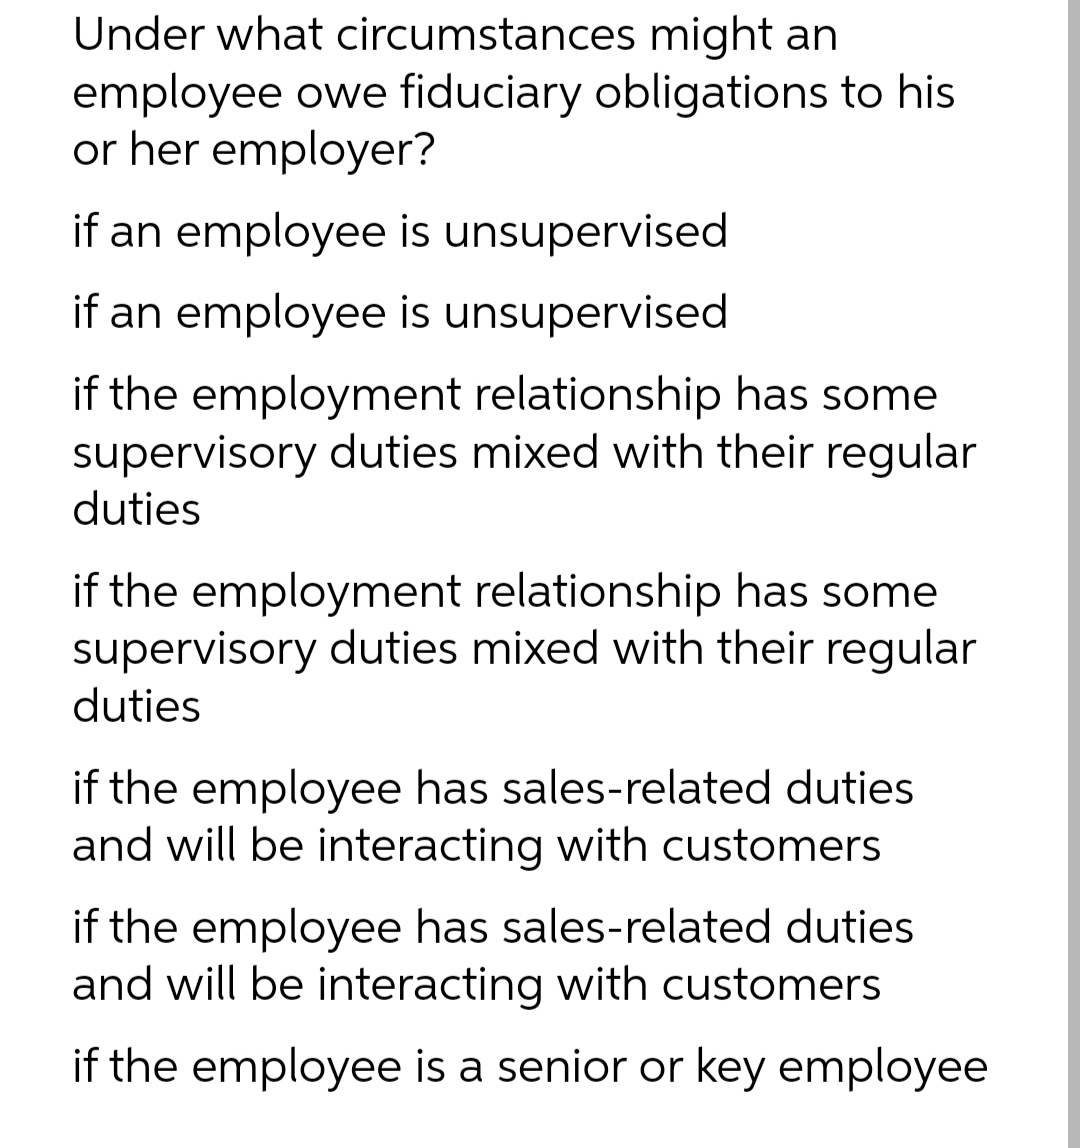 Under what circumstances might an
employee owe fiduciary obligations to his
or her employer?
if an employee is unsupervised
if an employee is unsupervised
if the employment relationship has some
supervisory duties mixed with their regular
duties
if the employment relationship has some
supervisory duties mixed with their regular
duties
if the employee has sales-related duties
and will be interacting with customers
if the employee has sales-related duties
and will be interacting with customers
if the employee is a senior or key employee